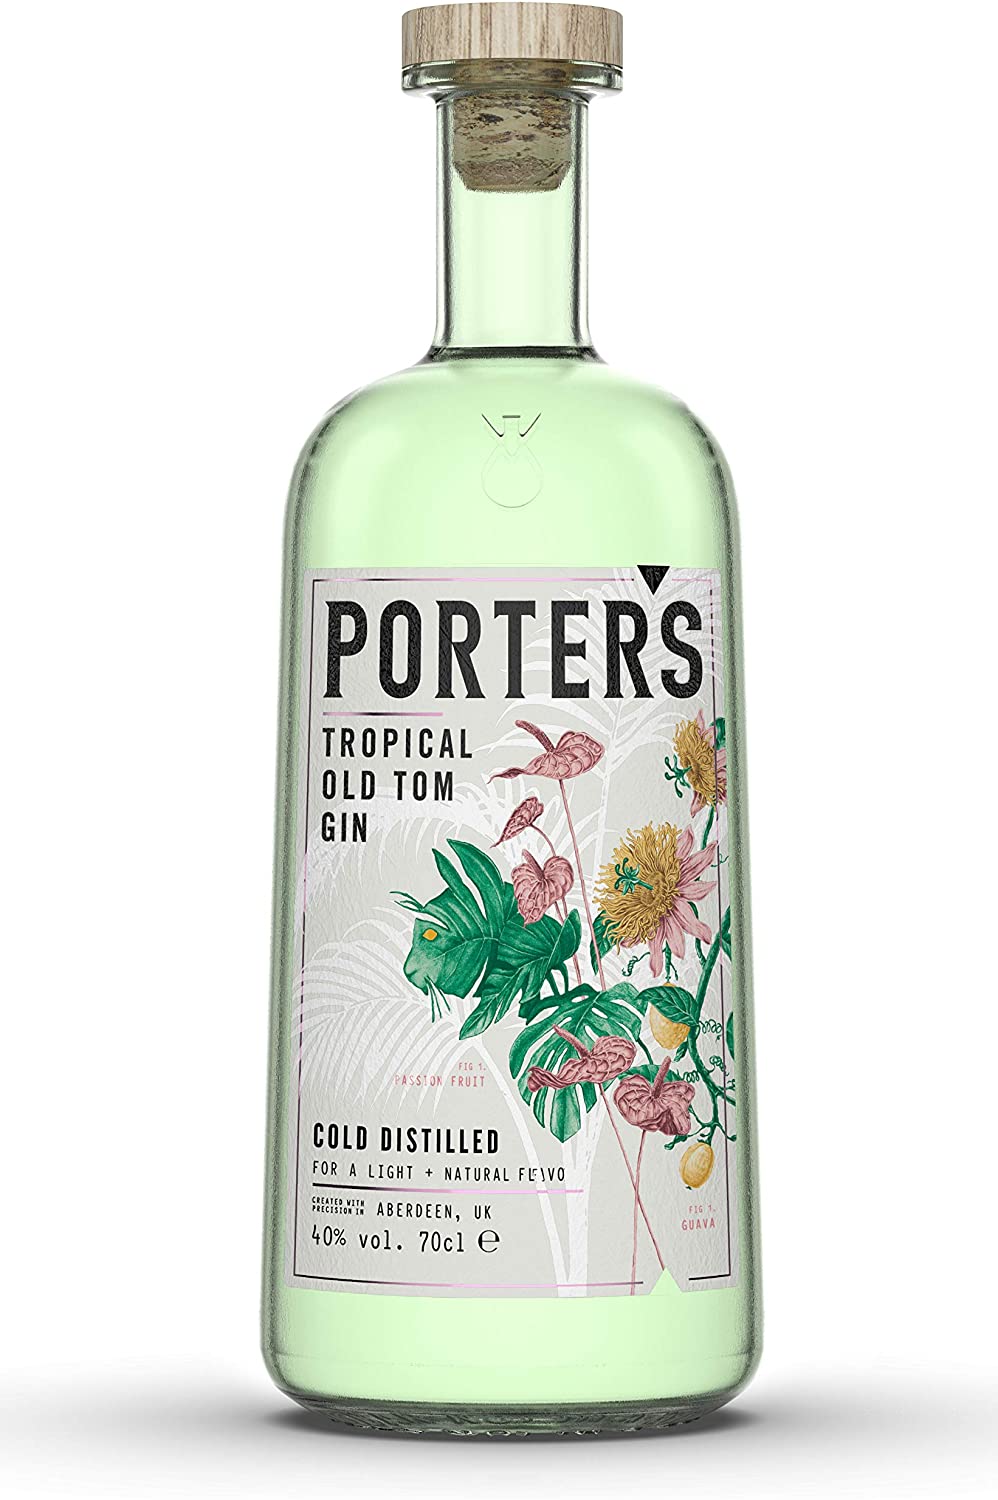 porters gin - modern classic & tropical old tom porters tropical old tom gin